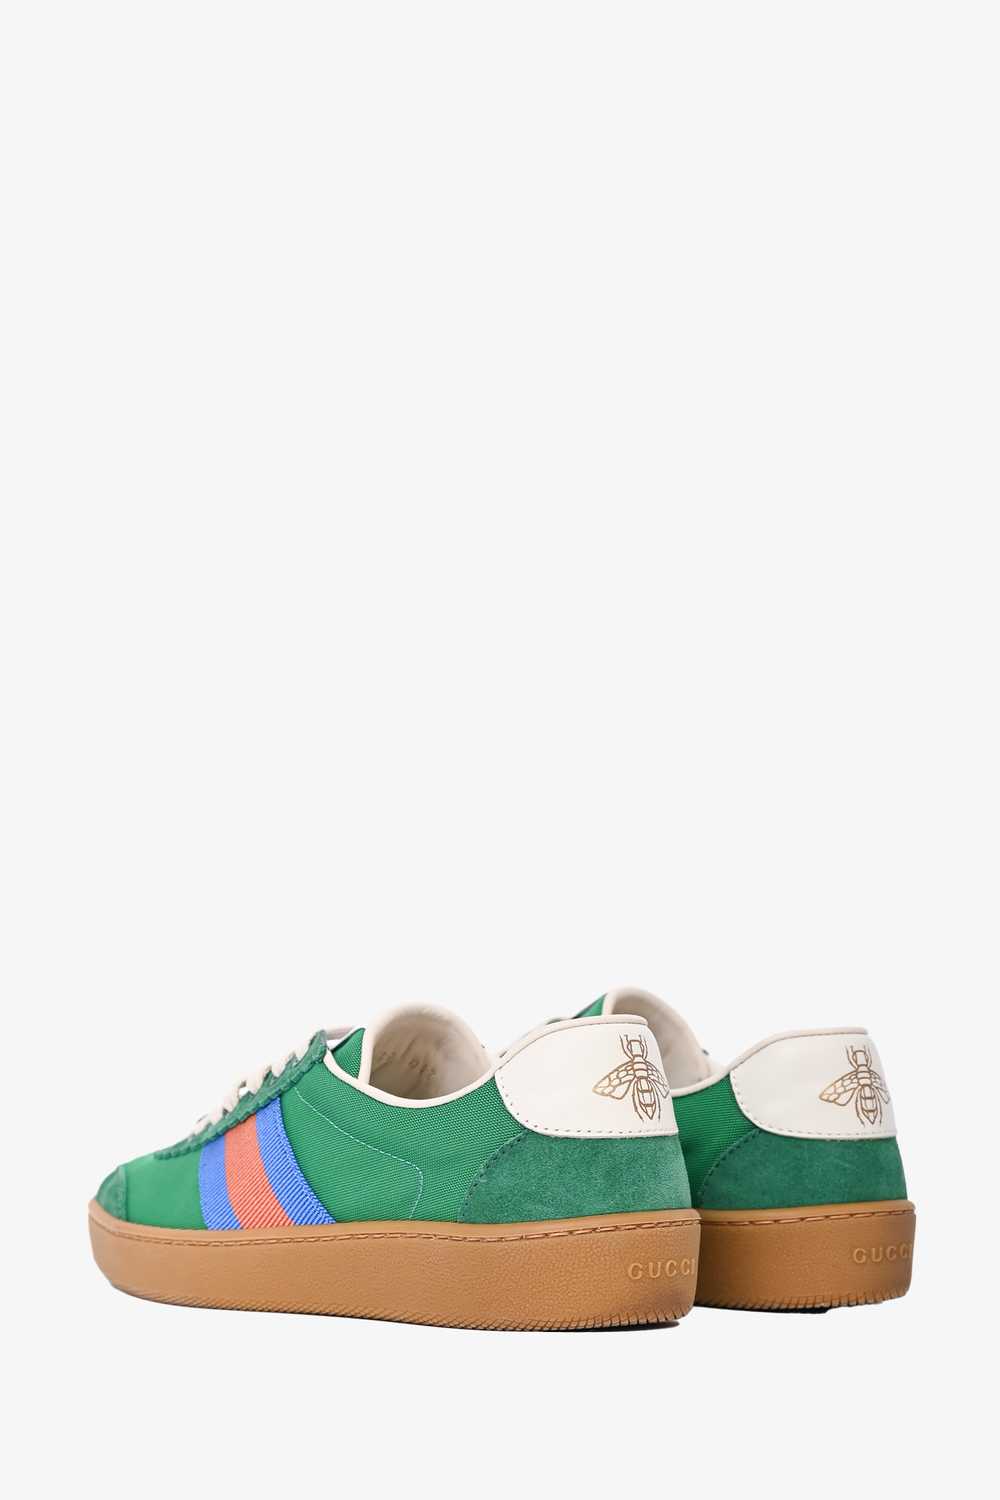 Gucci Green Web Accent Sneakers Size 35 - image 5